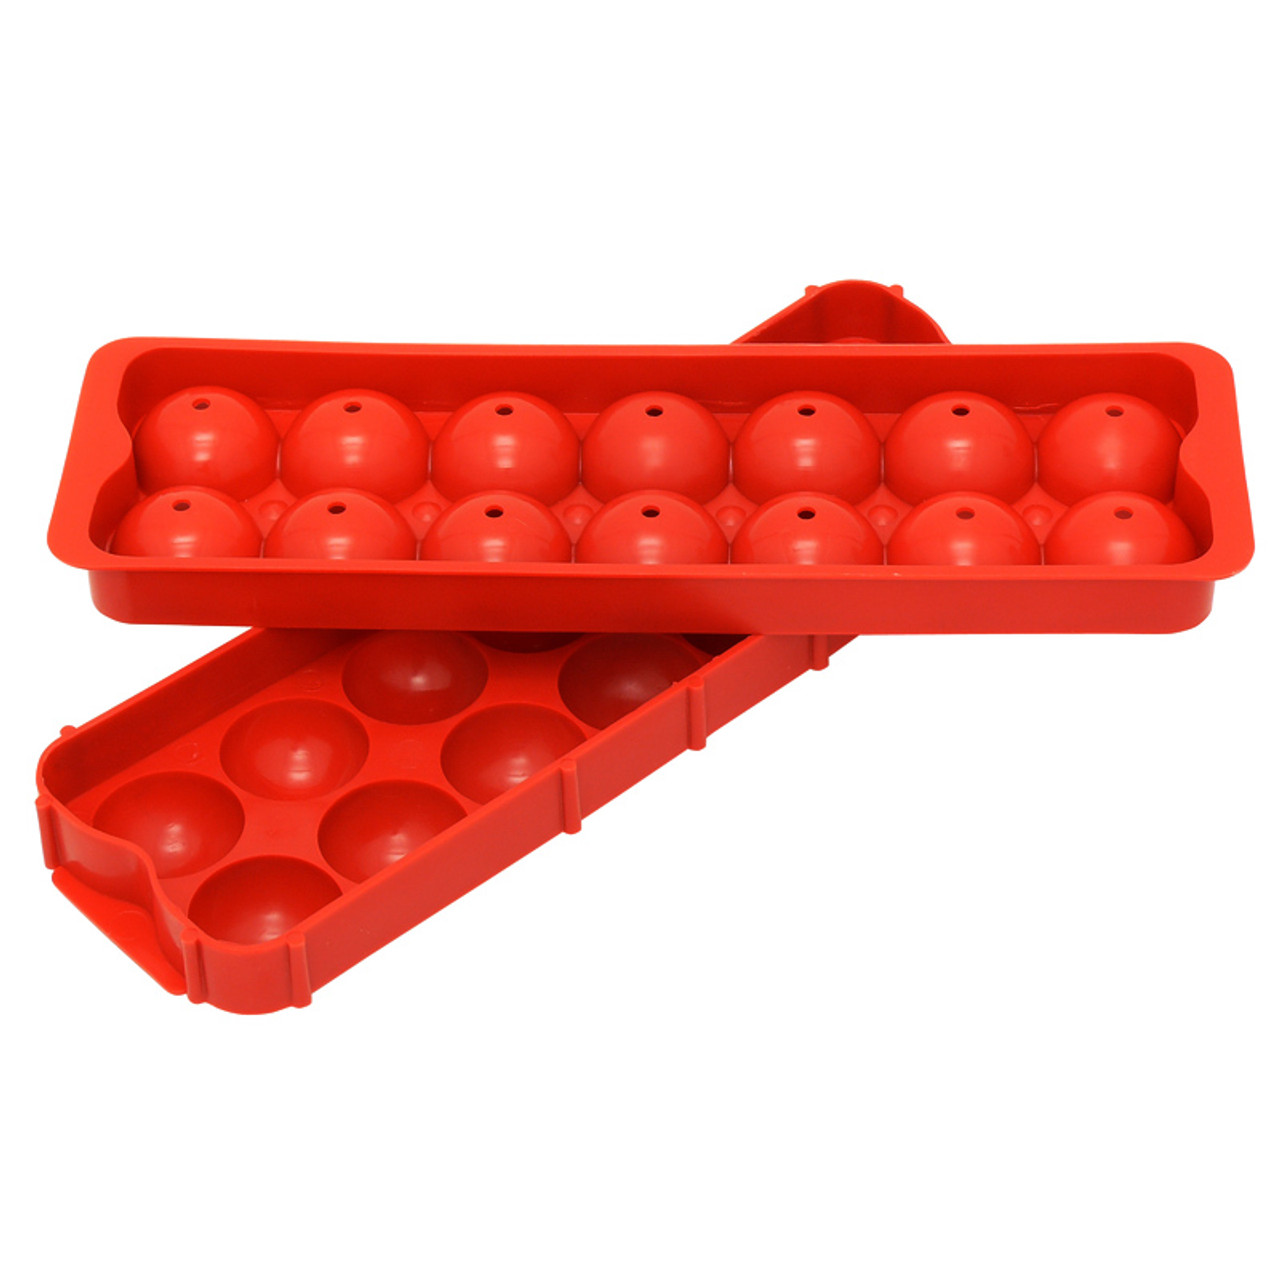 Ice Ball Tray - Cutler's Ice Ball Tray for perfectly round ice balls